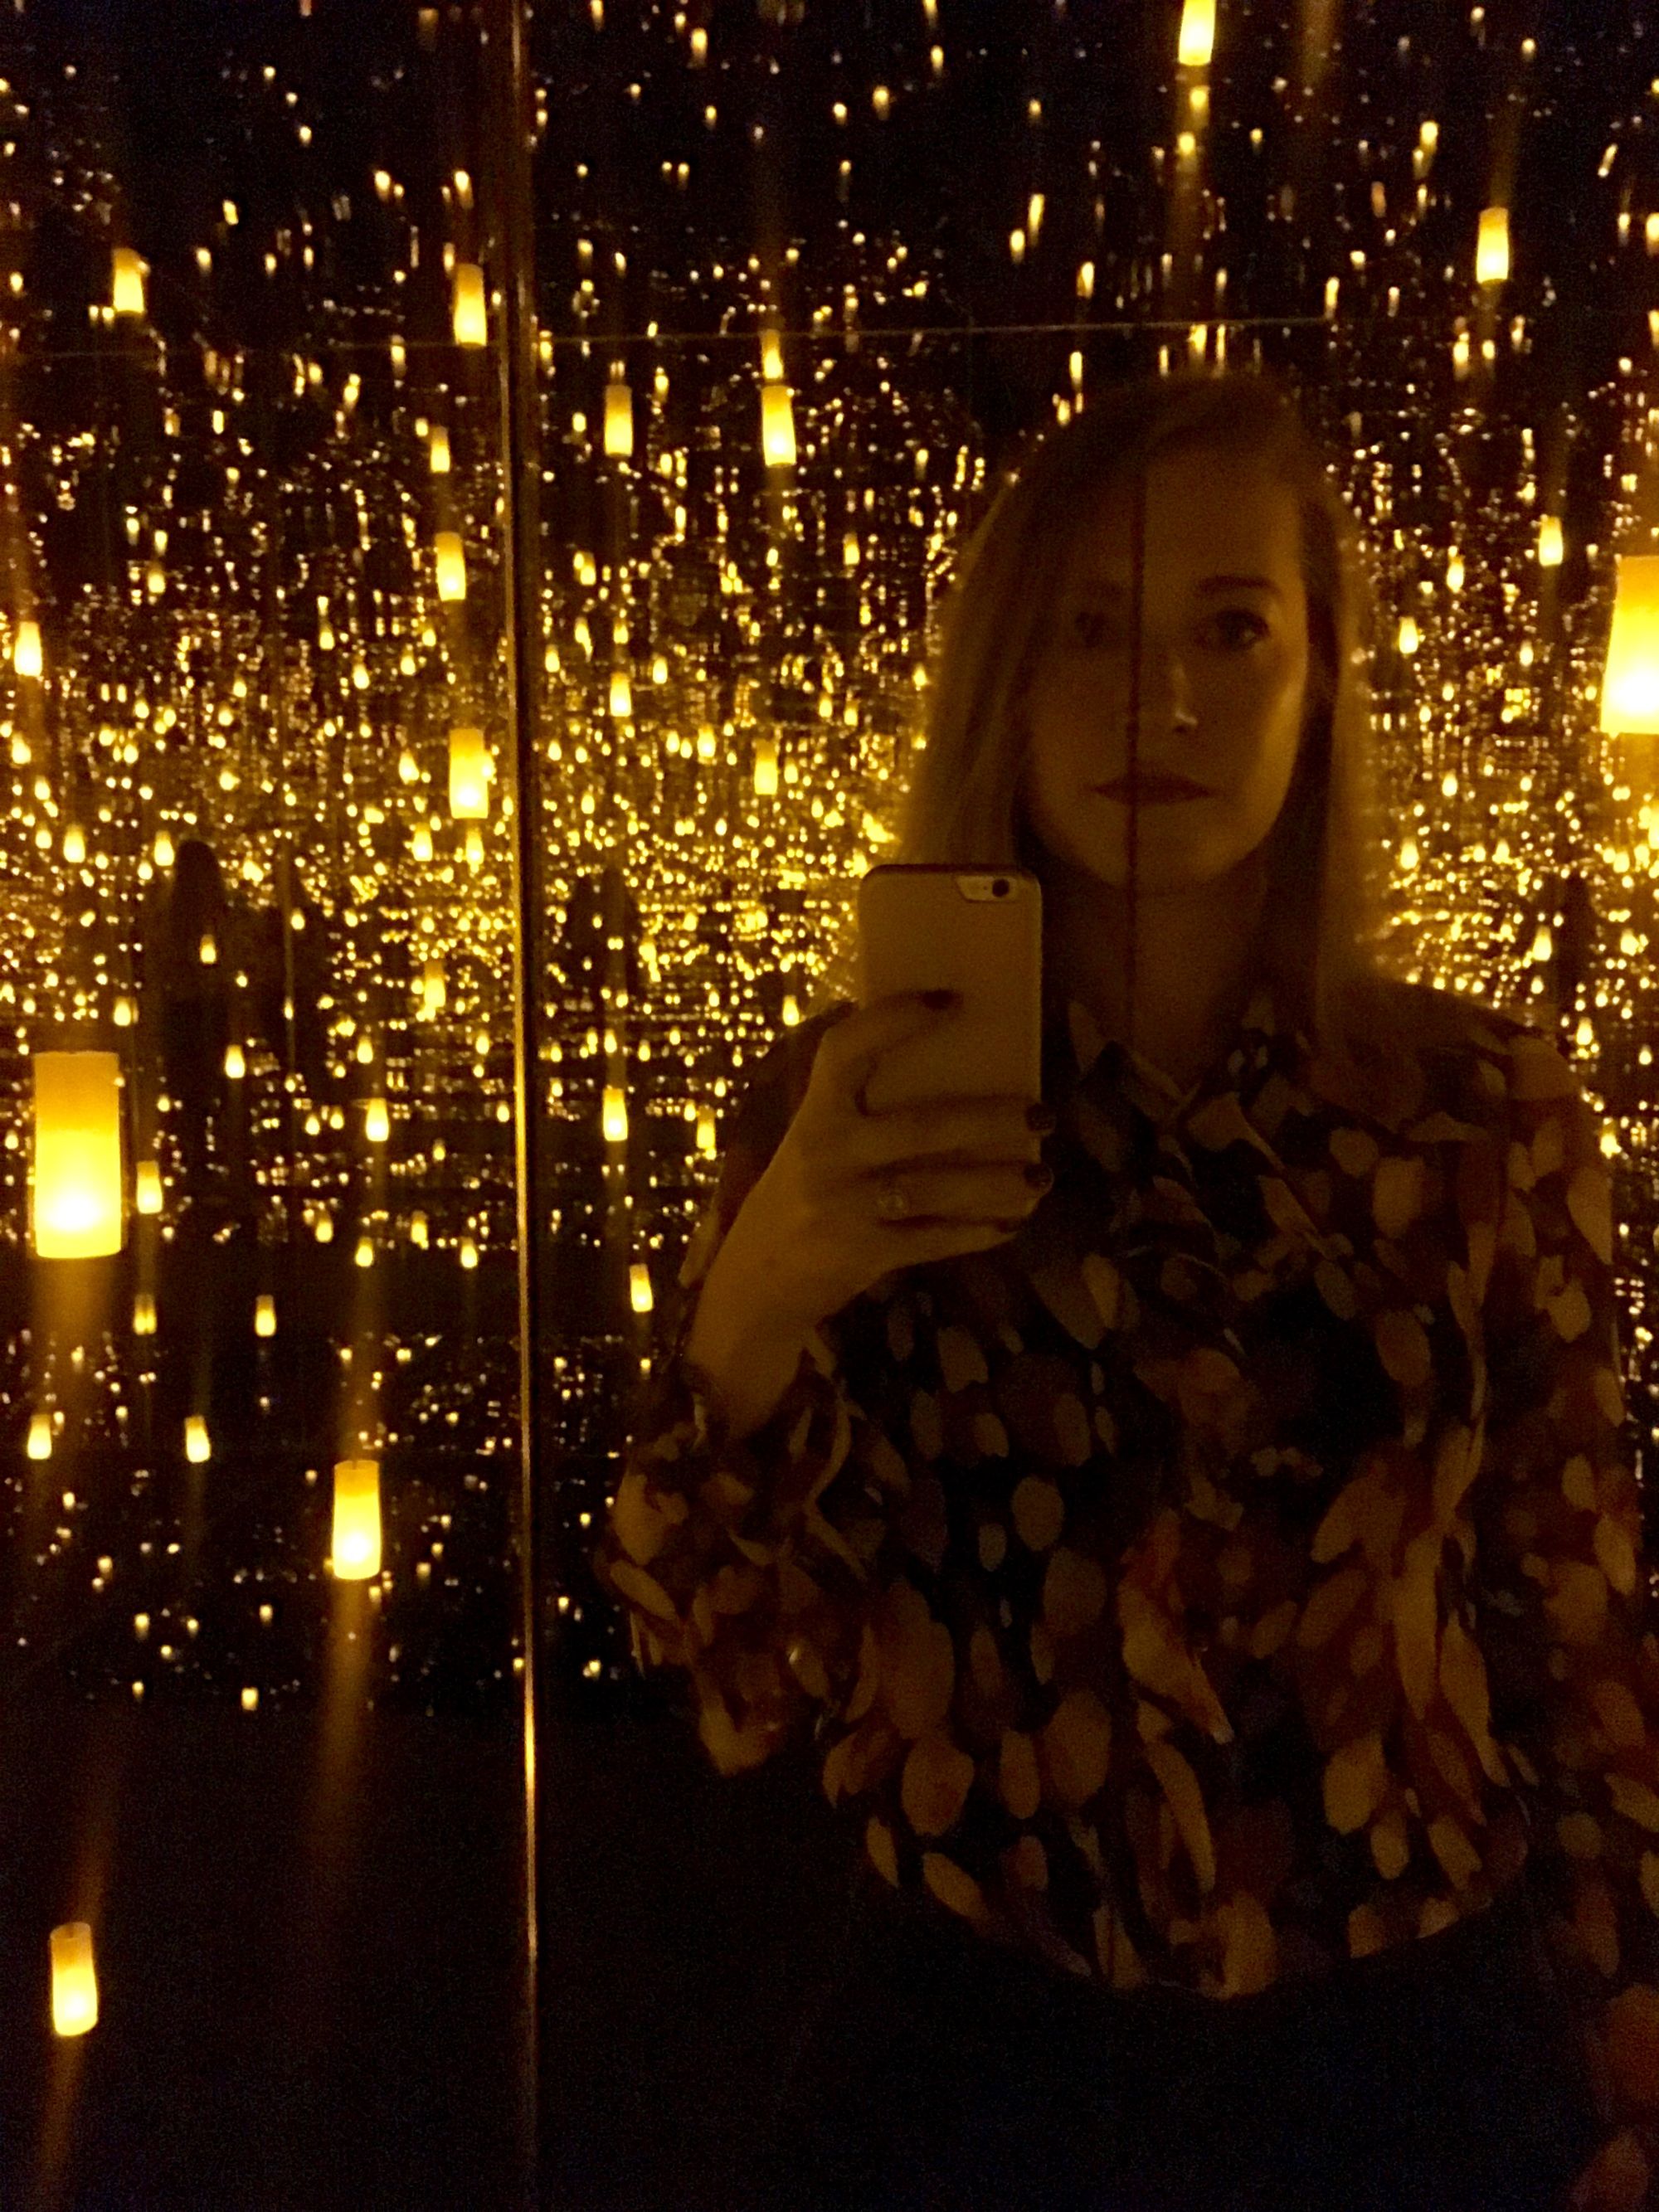 The author inside of a sparkle-filled installation by Yayoi Kusama